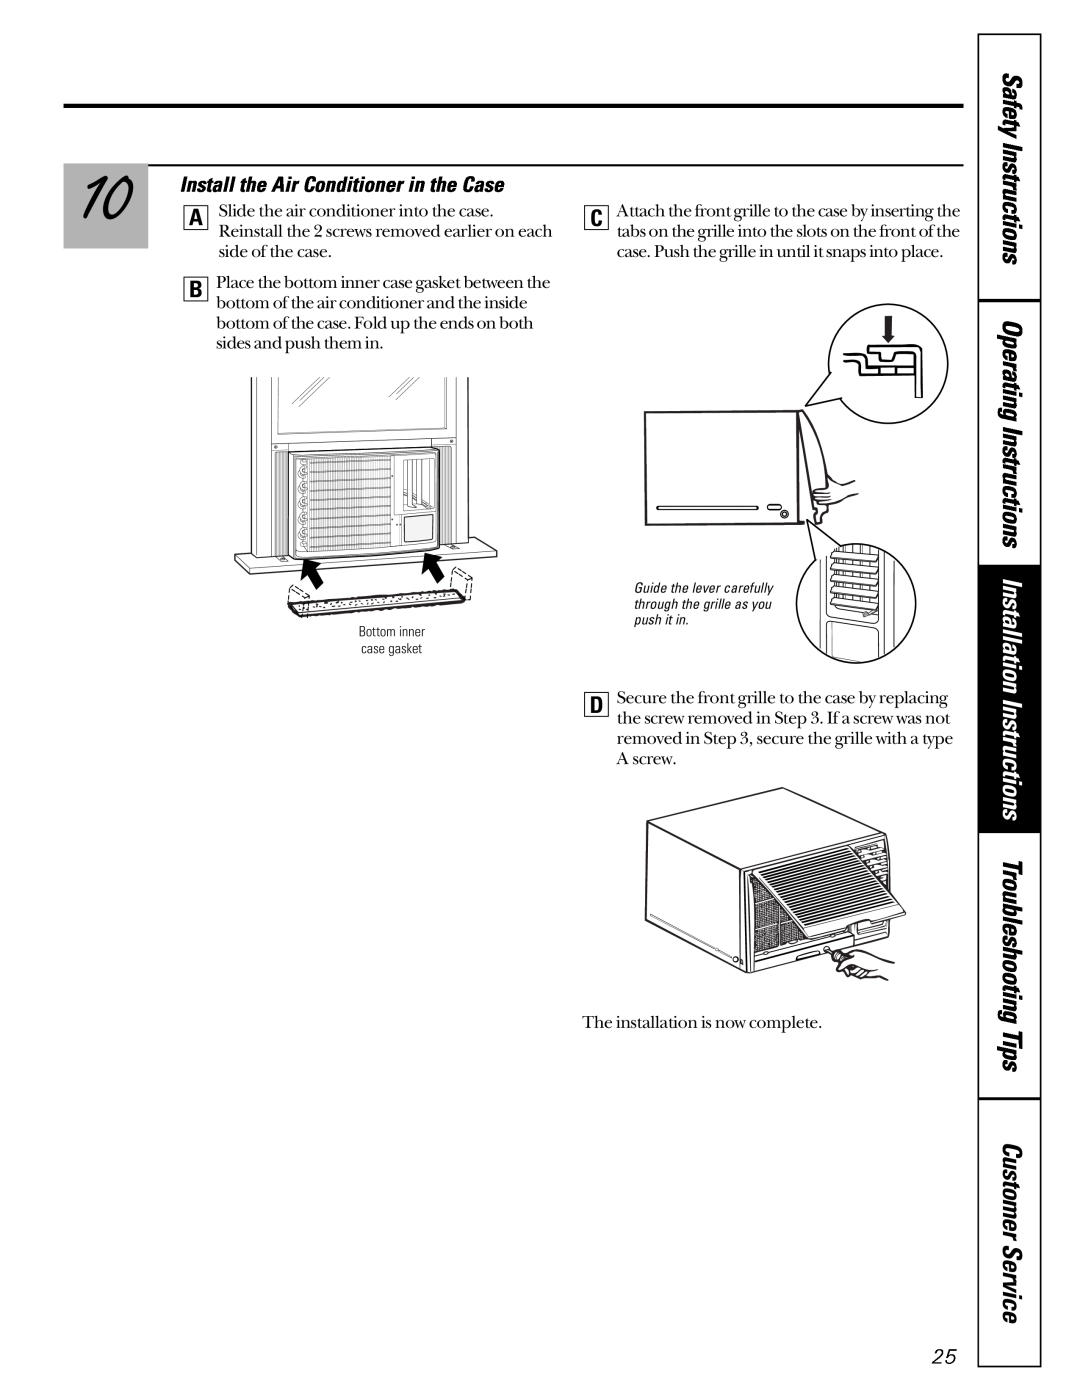 GE AS_06 Safety Instructions Operating Instructions, Customer Service, Installation Instructions Troubleshooting Tips 